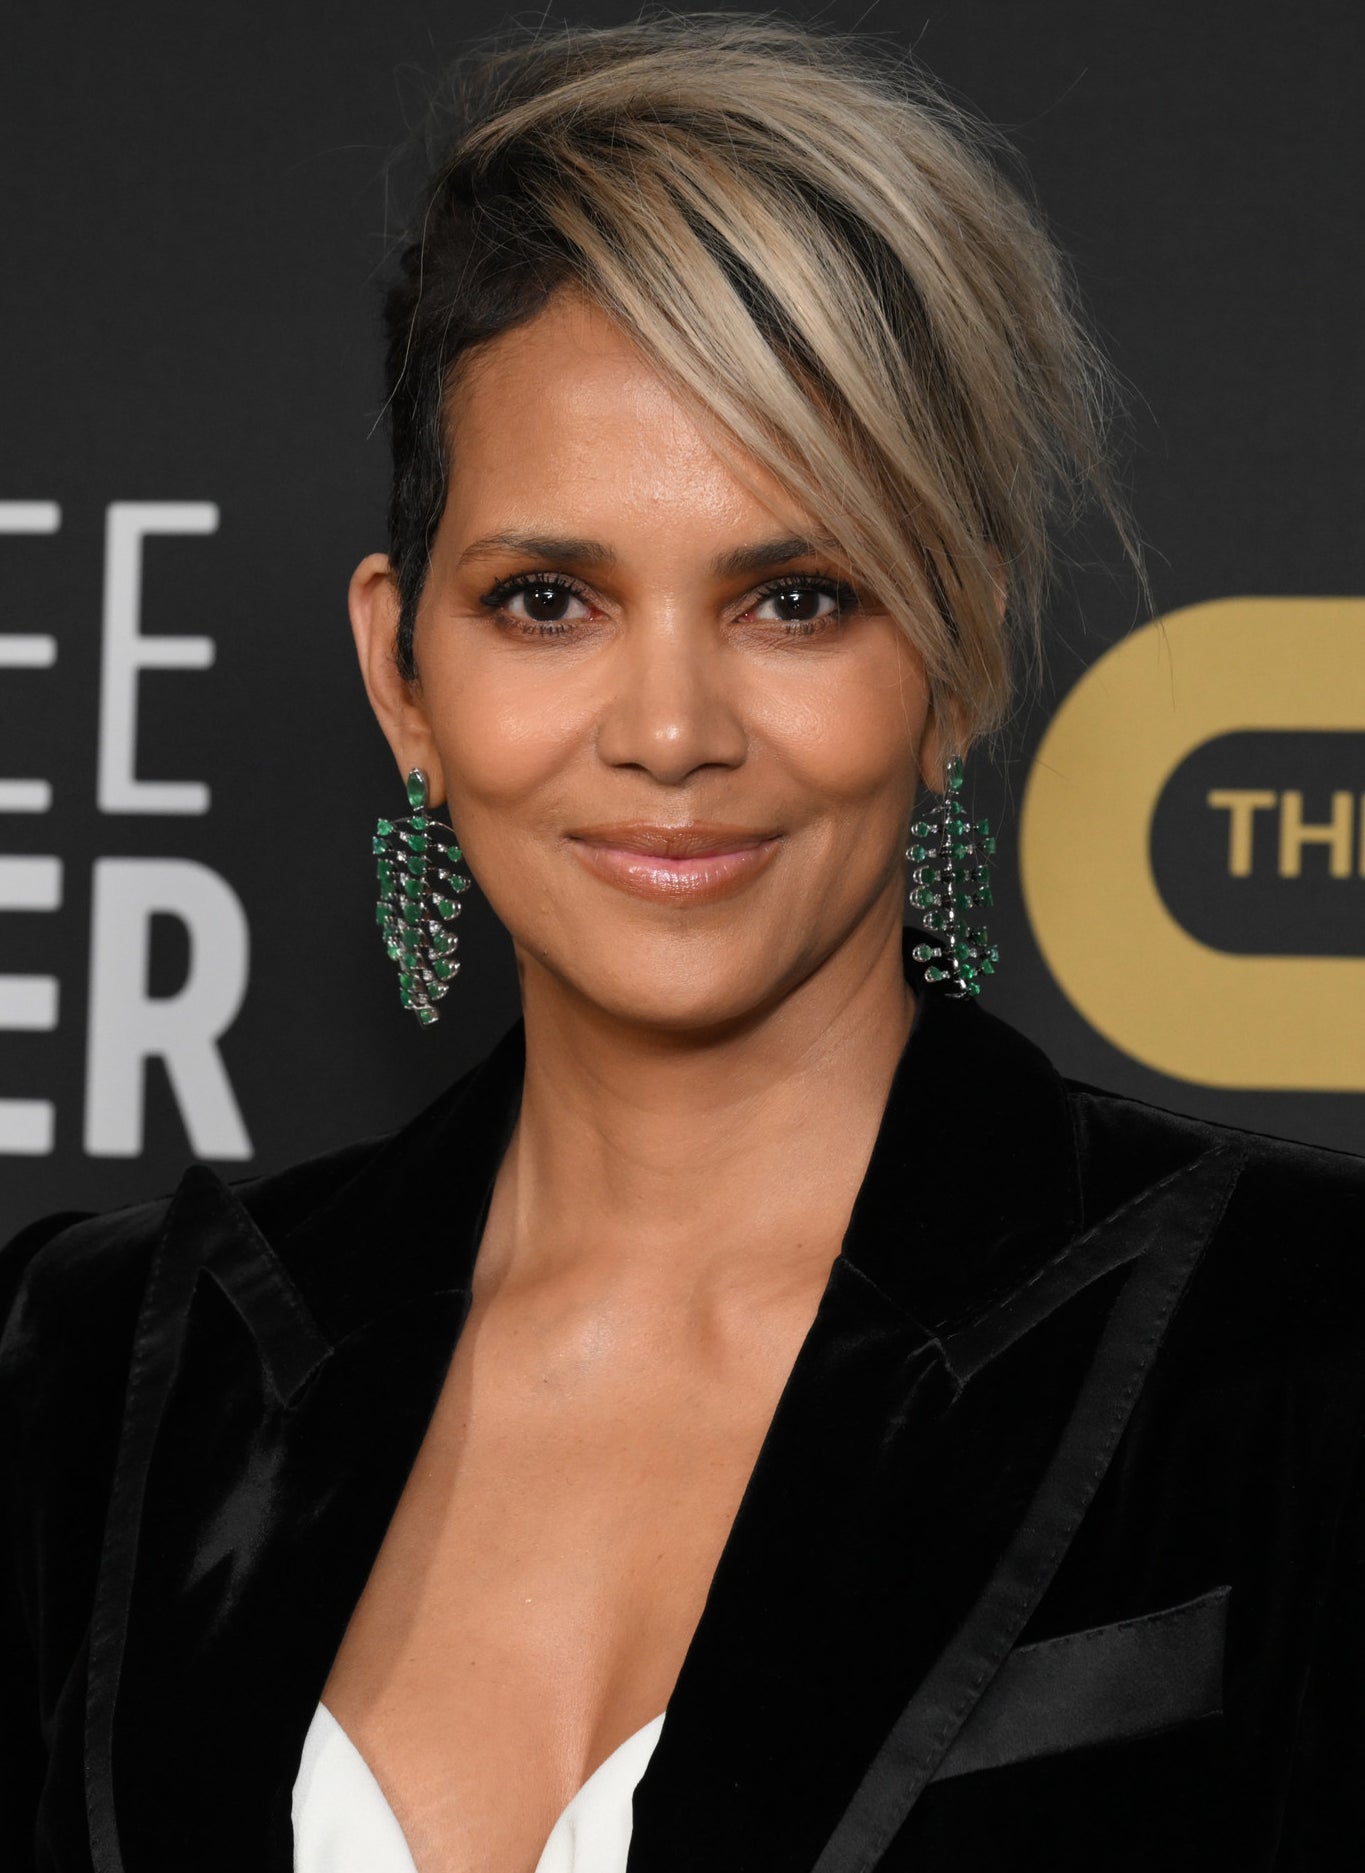 Halle Berry smiling at an event